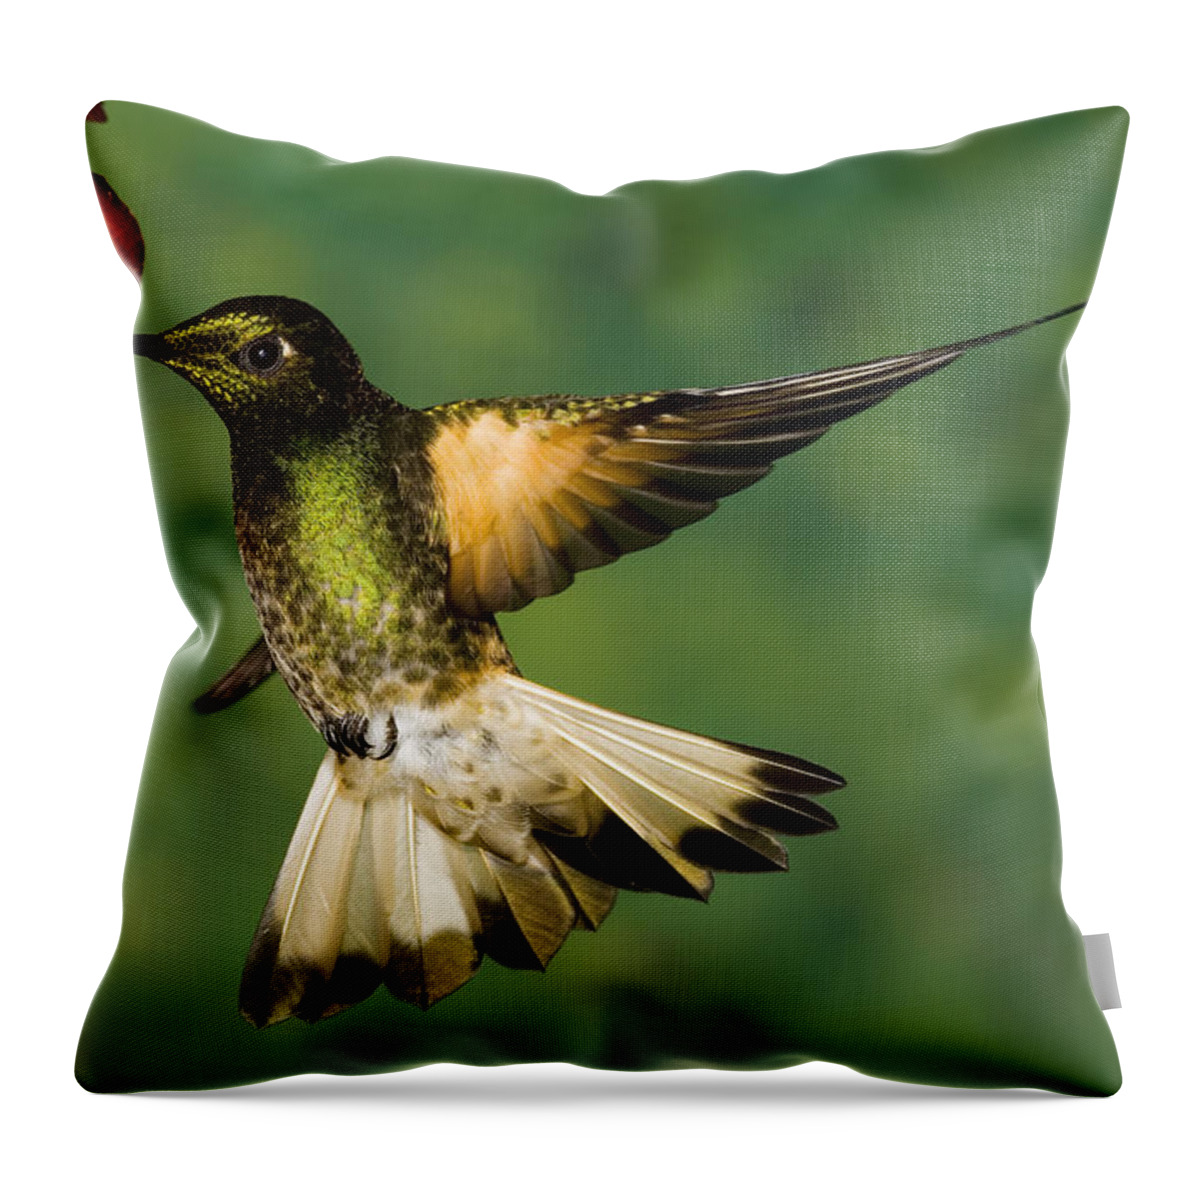 00221359 Throw Pillow featuring the photograph Buff-tailed Coronet Feeding by Tom Vezo